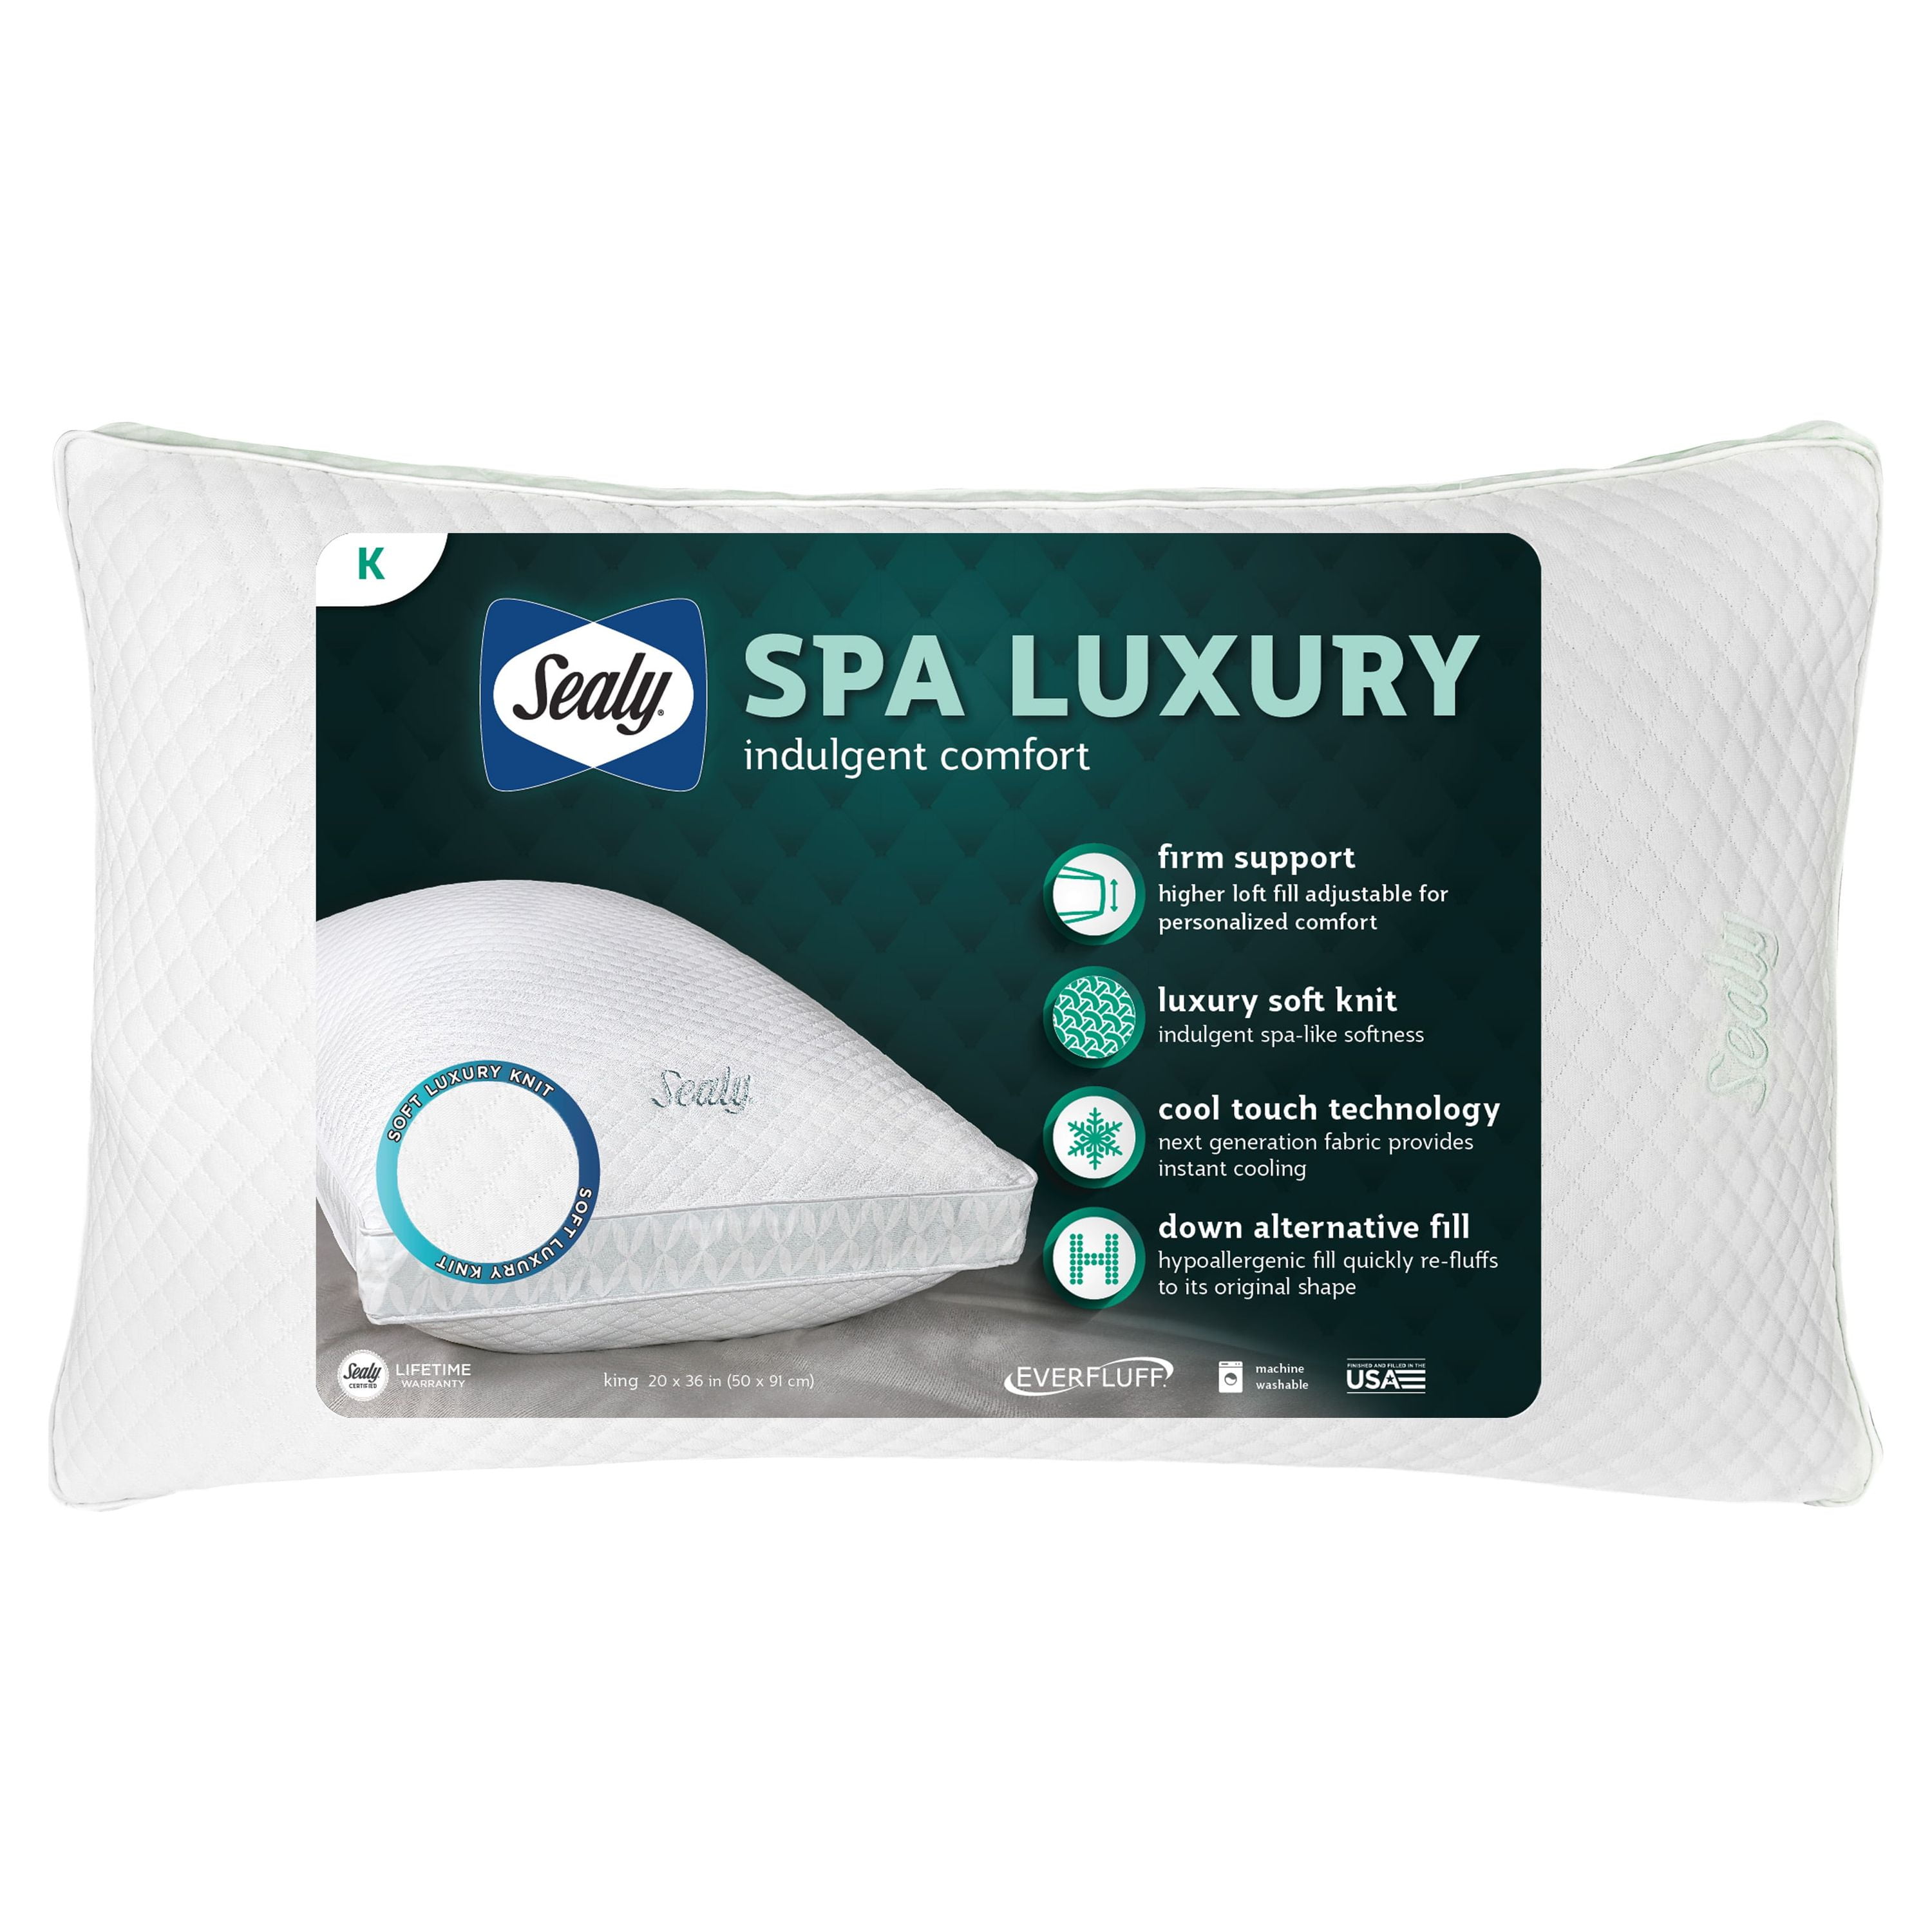 Sealy Extra Firm Maintains Shape Cotton Pillow, King